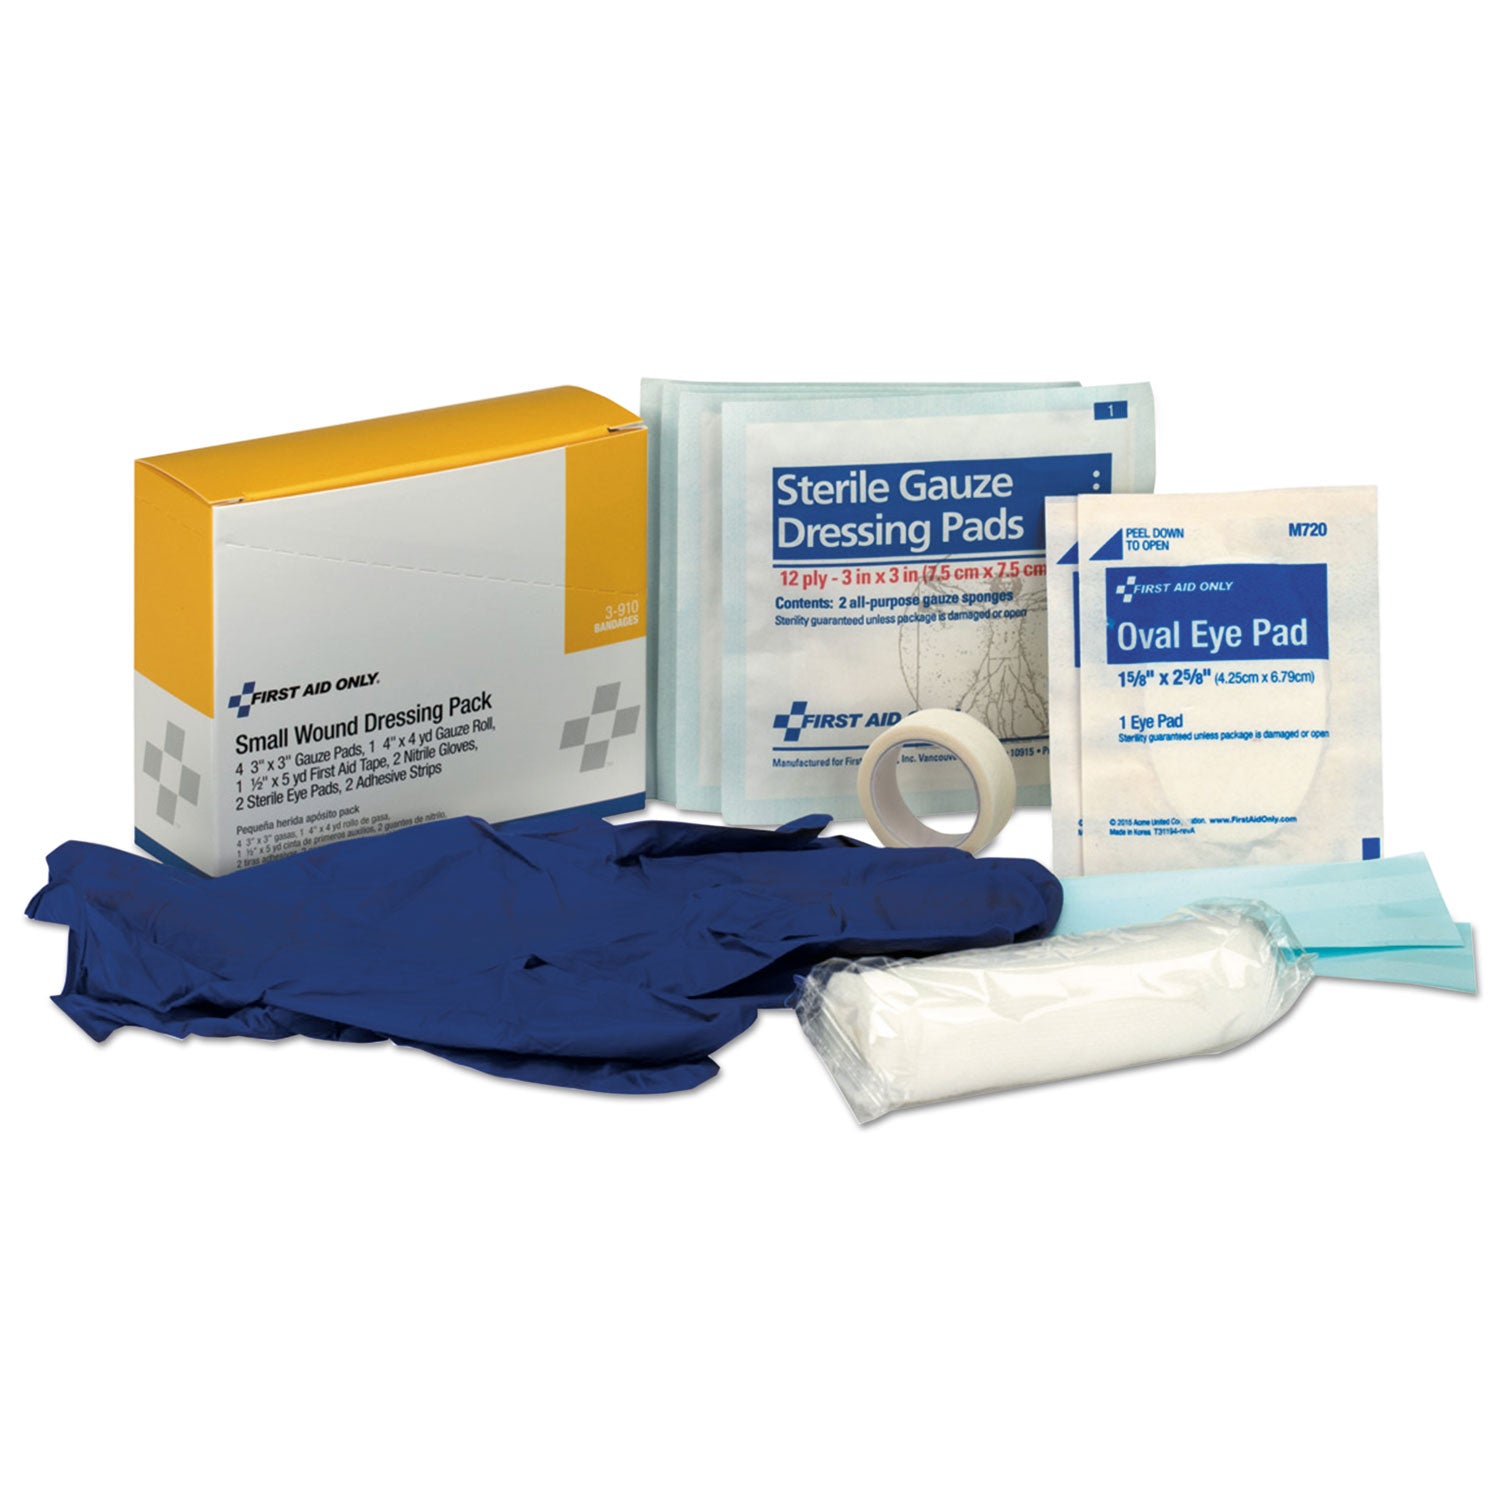 small-wound-dressing-kit-includes-gauze-tape-gloves-eye-pads-bandages_fao3910 - 1